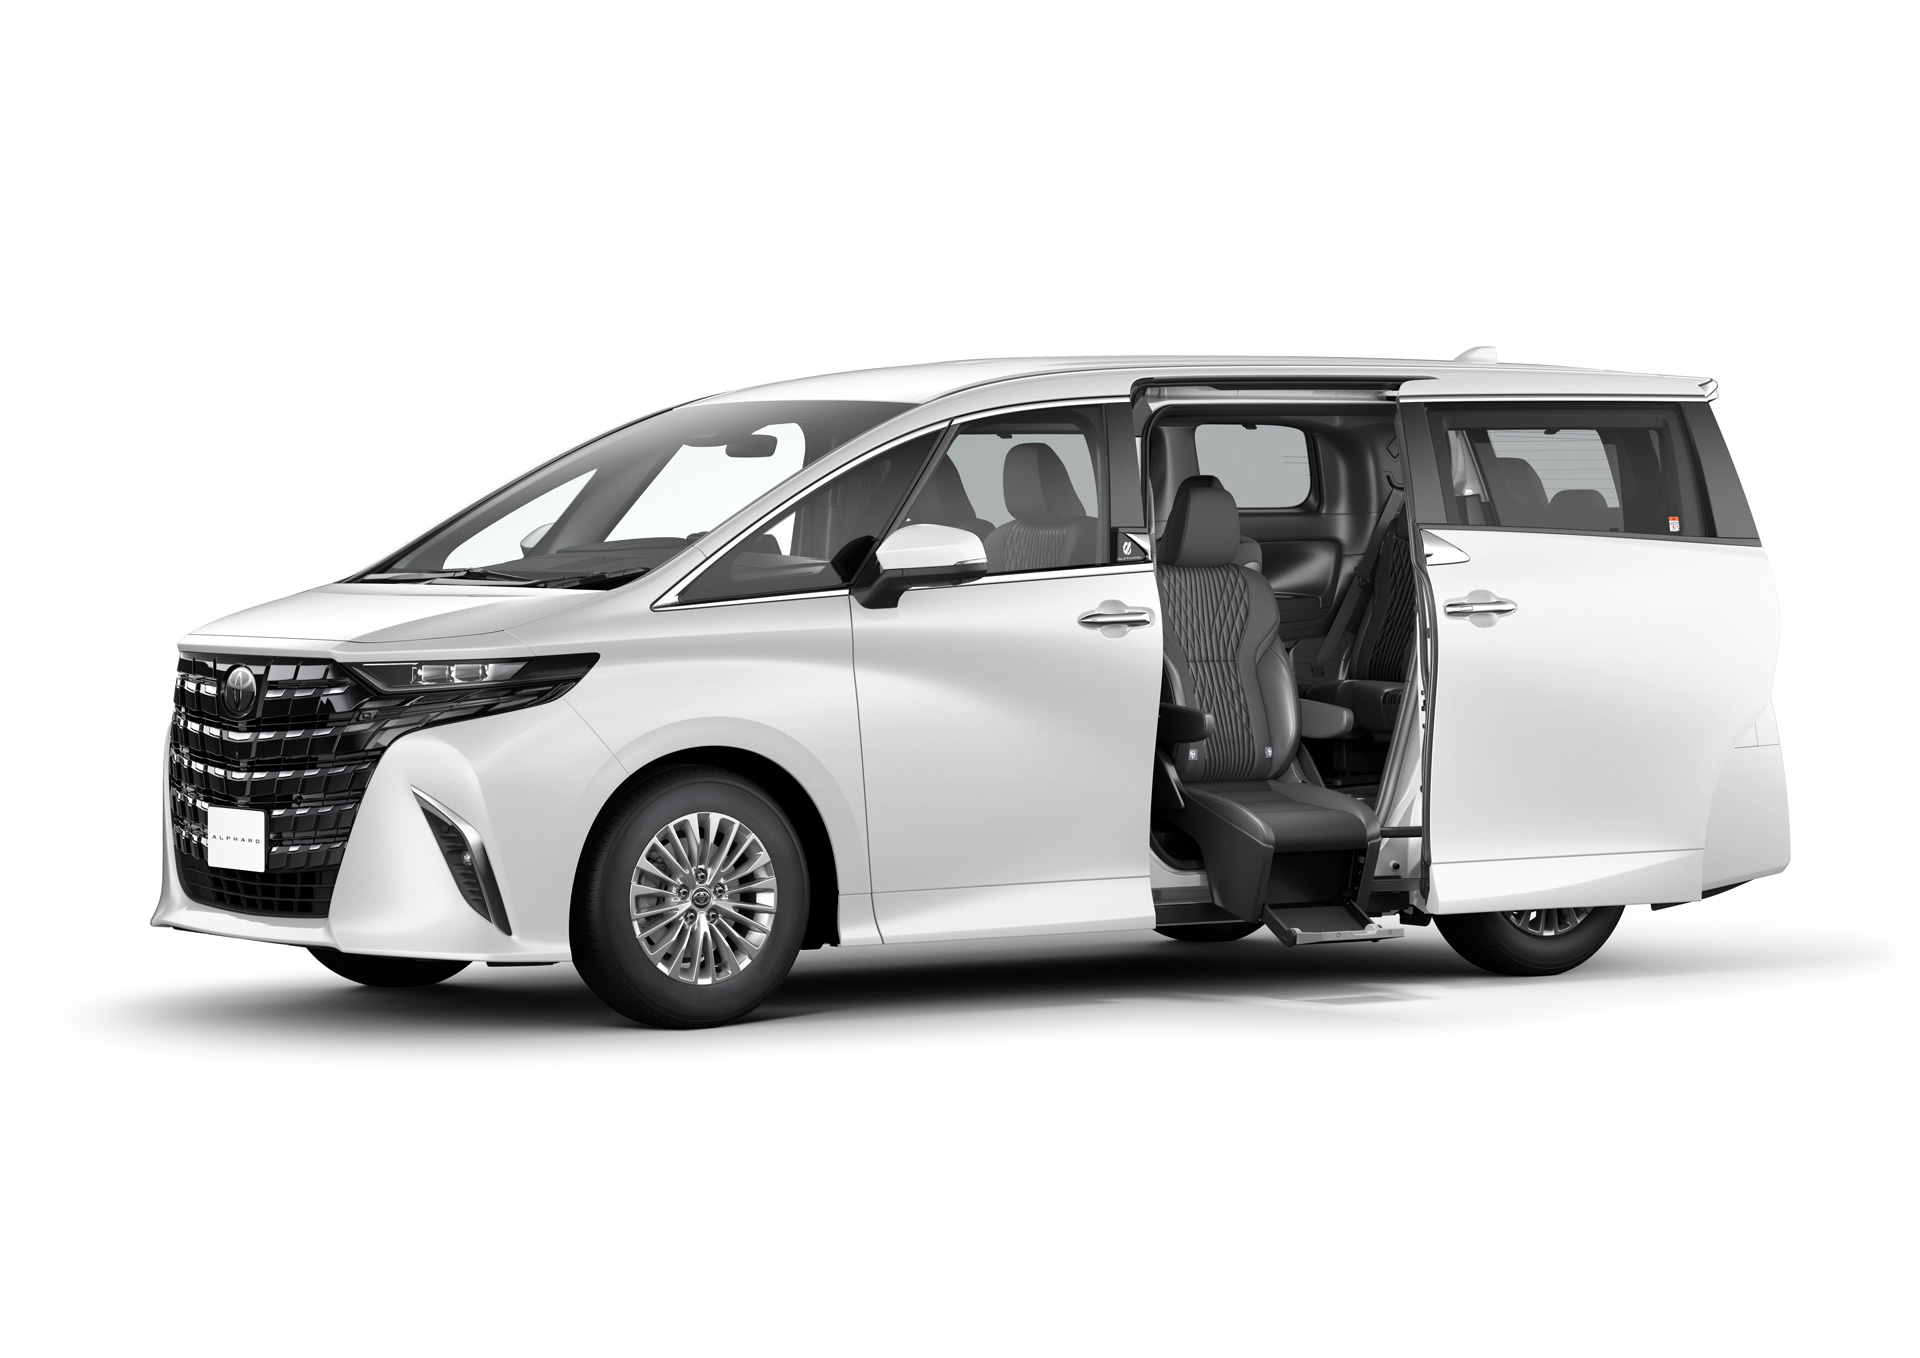 Toyota Launches All-New Alphard and Vellfire in Japan | Toyota